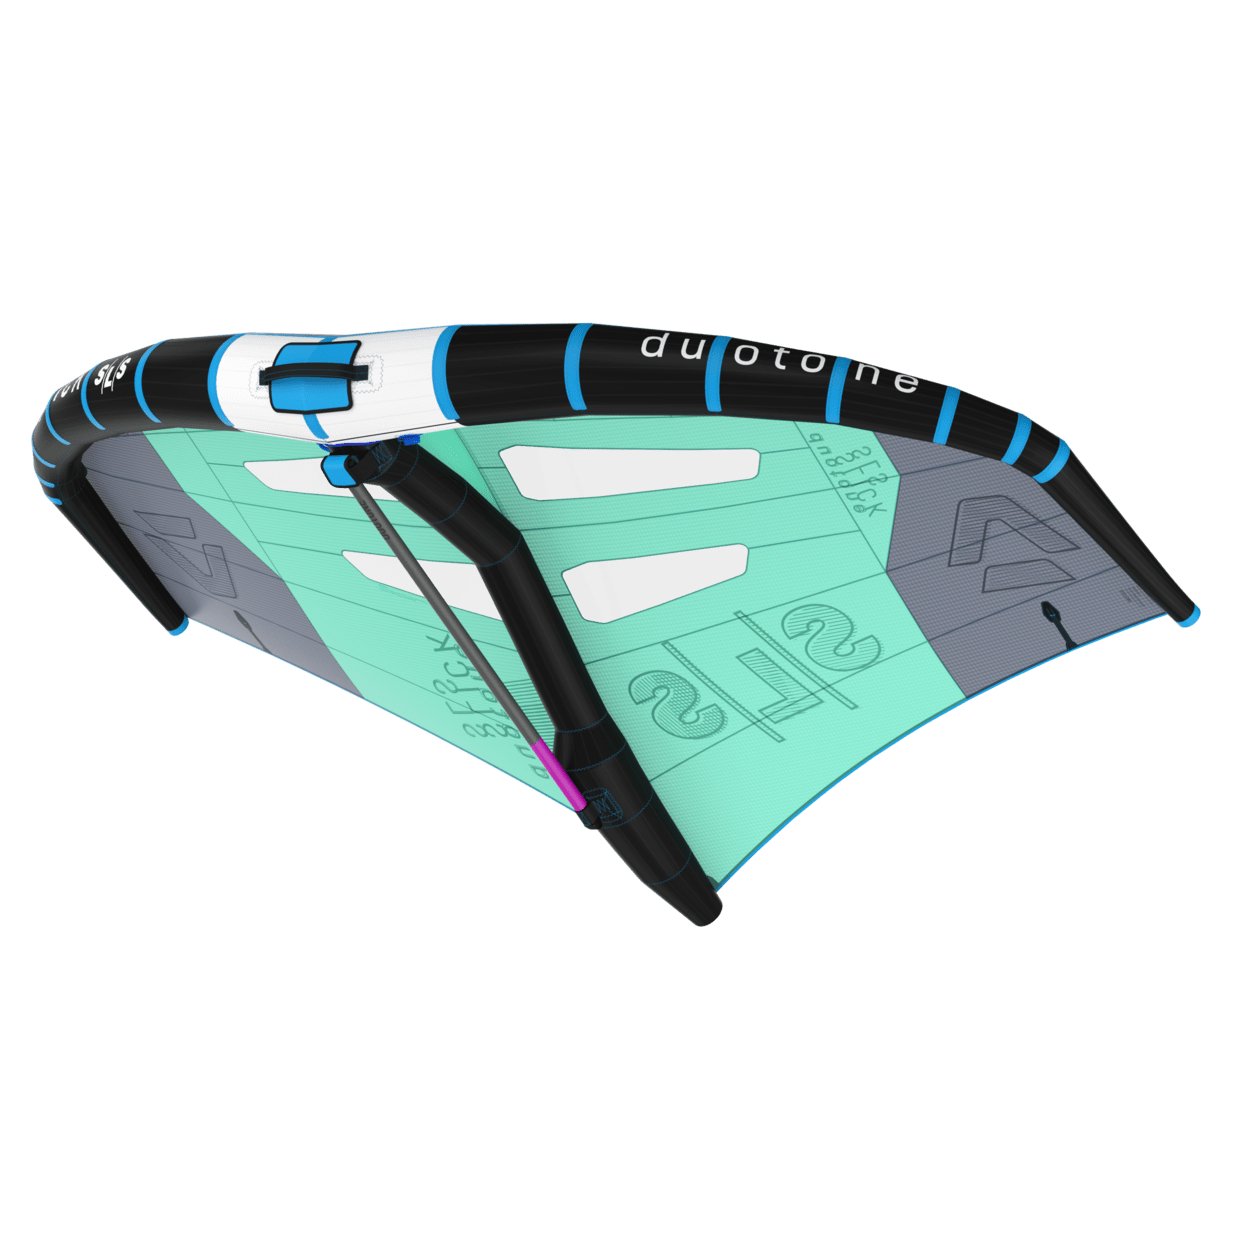 Duotone Foil Wing Slick SLS 2022 - Worthing Watersports - 9010583120560 - Foilwing - Duotone X